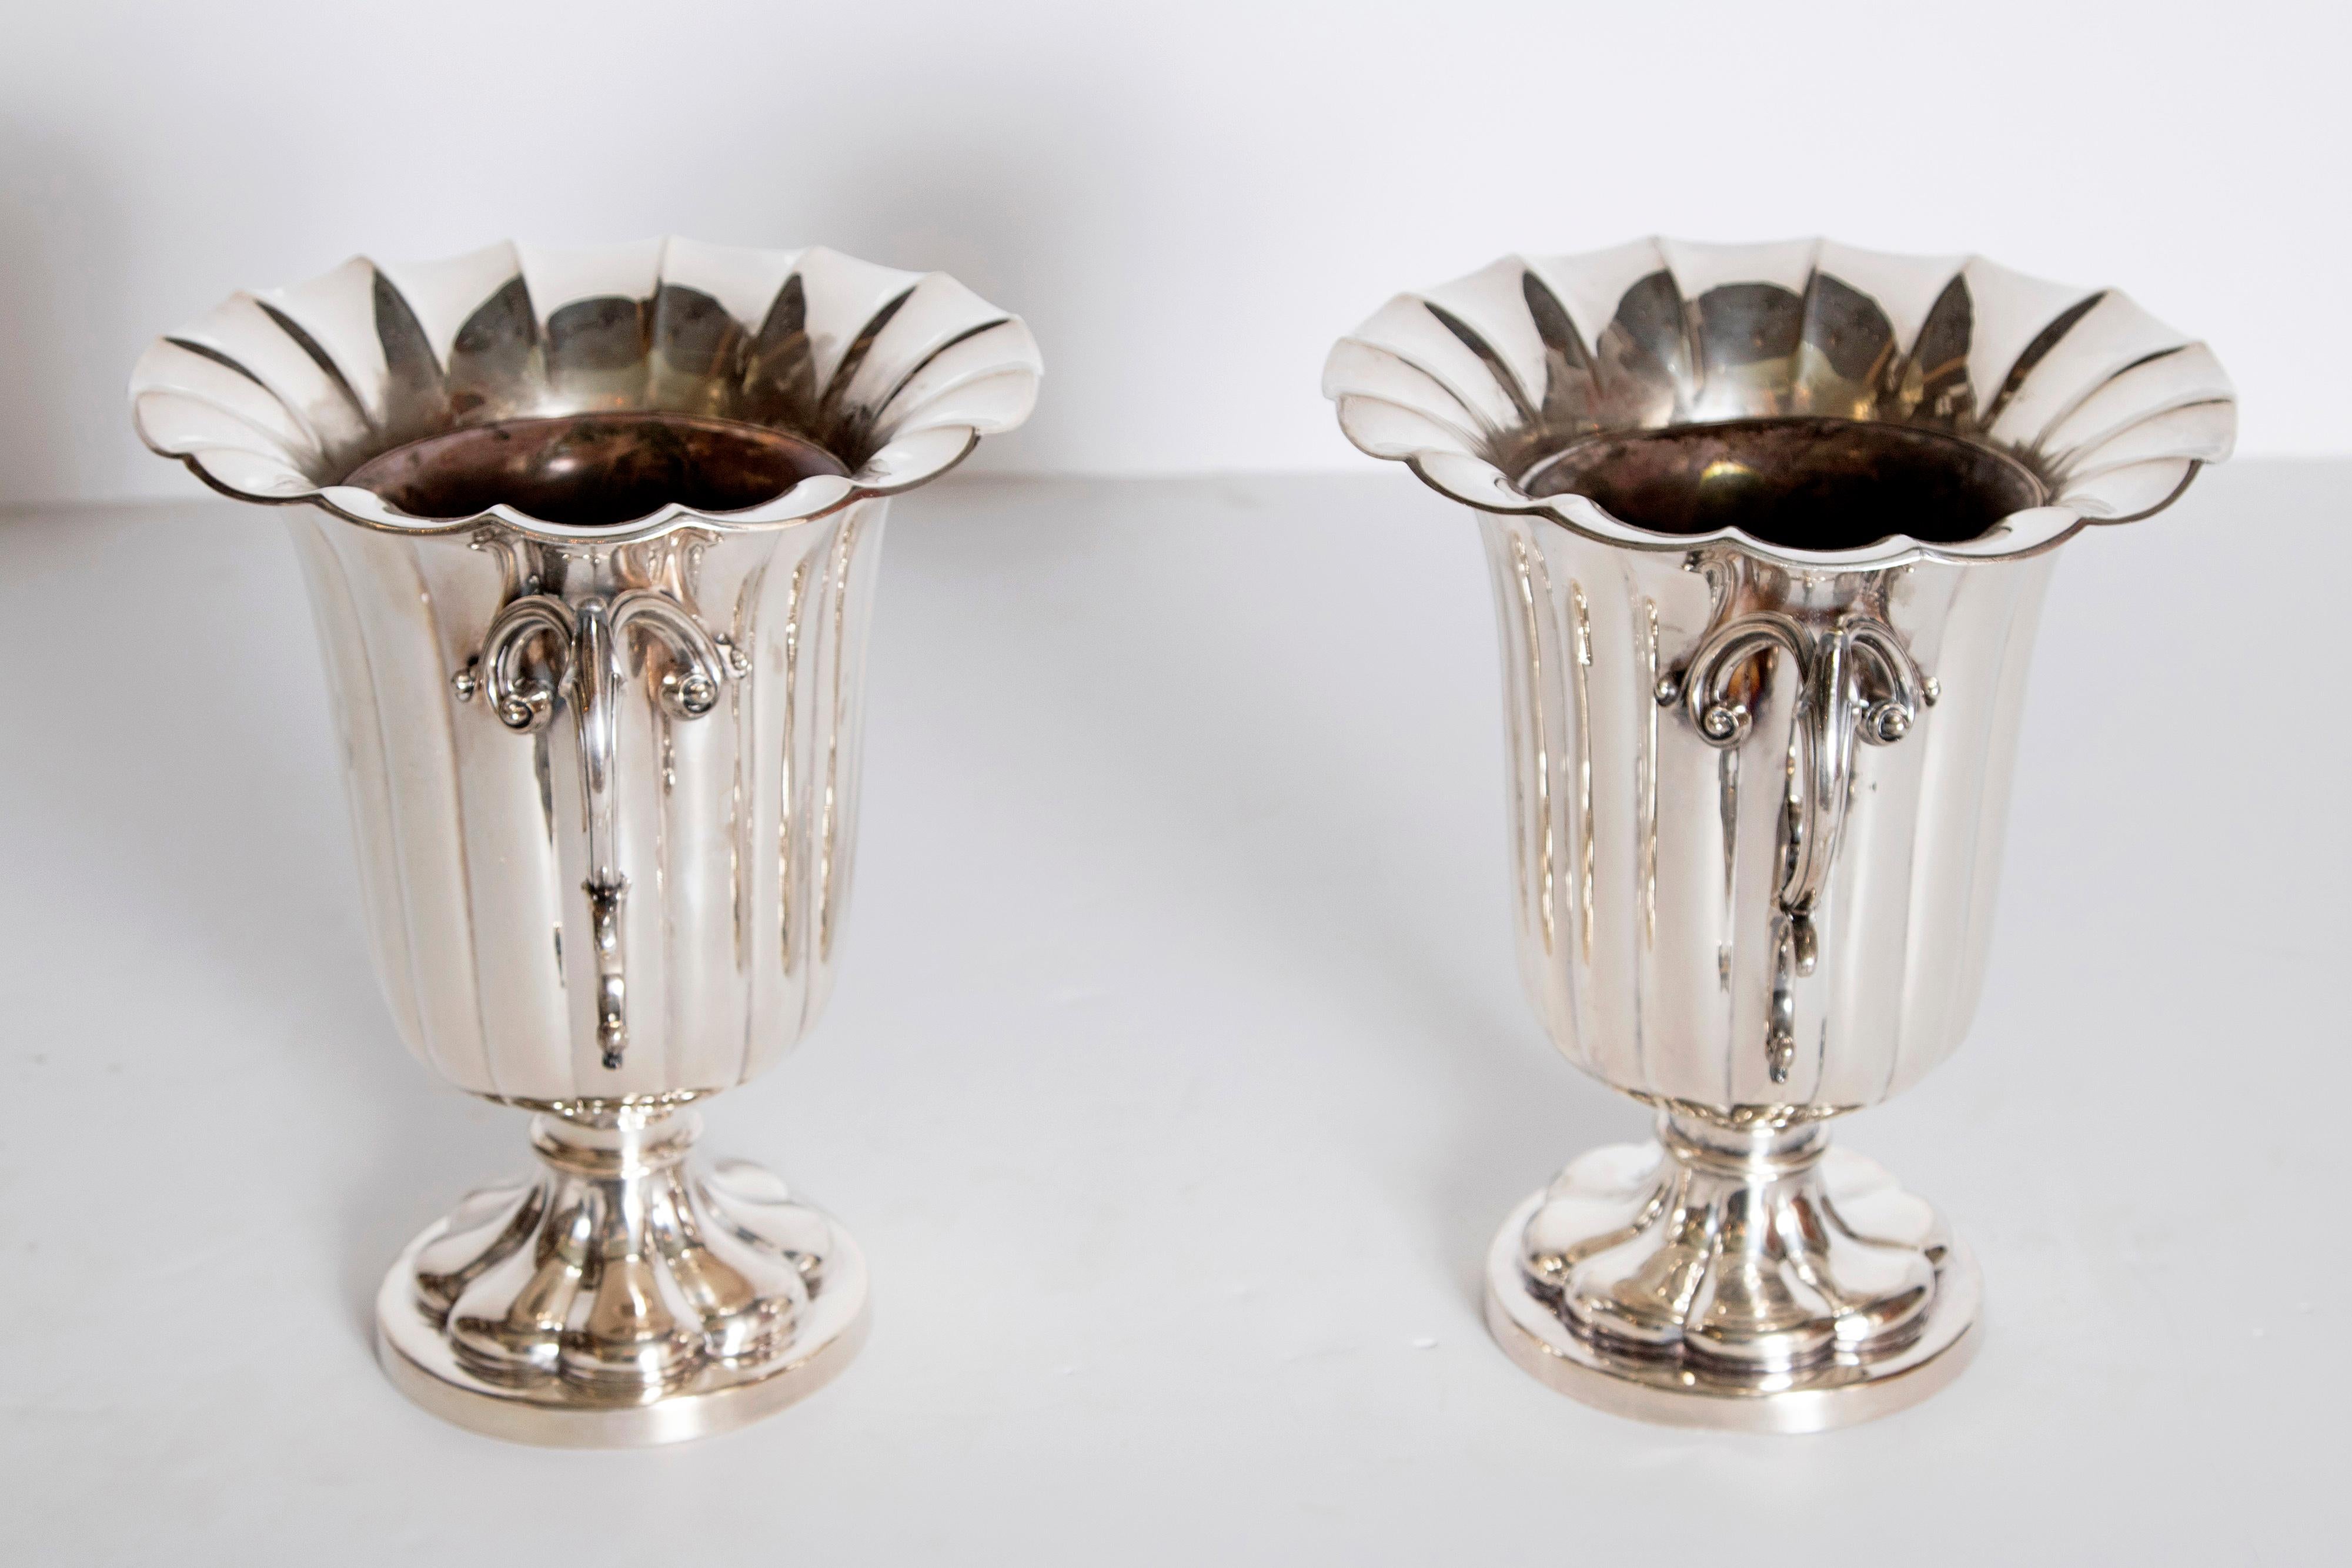 A pair of silver plate ice vases with liners. Ribbed urn form body with flaring ruffled rim openwork and acanthus handles. Sitting on a flared circular foot. Marks on base rim. Elkington & Co., England, circa 1850.